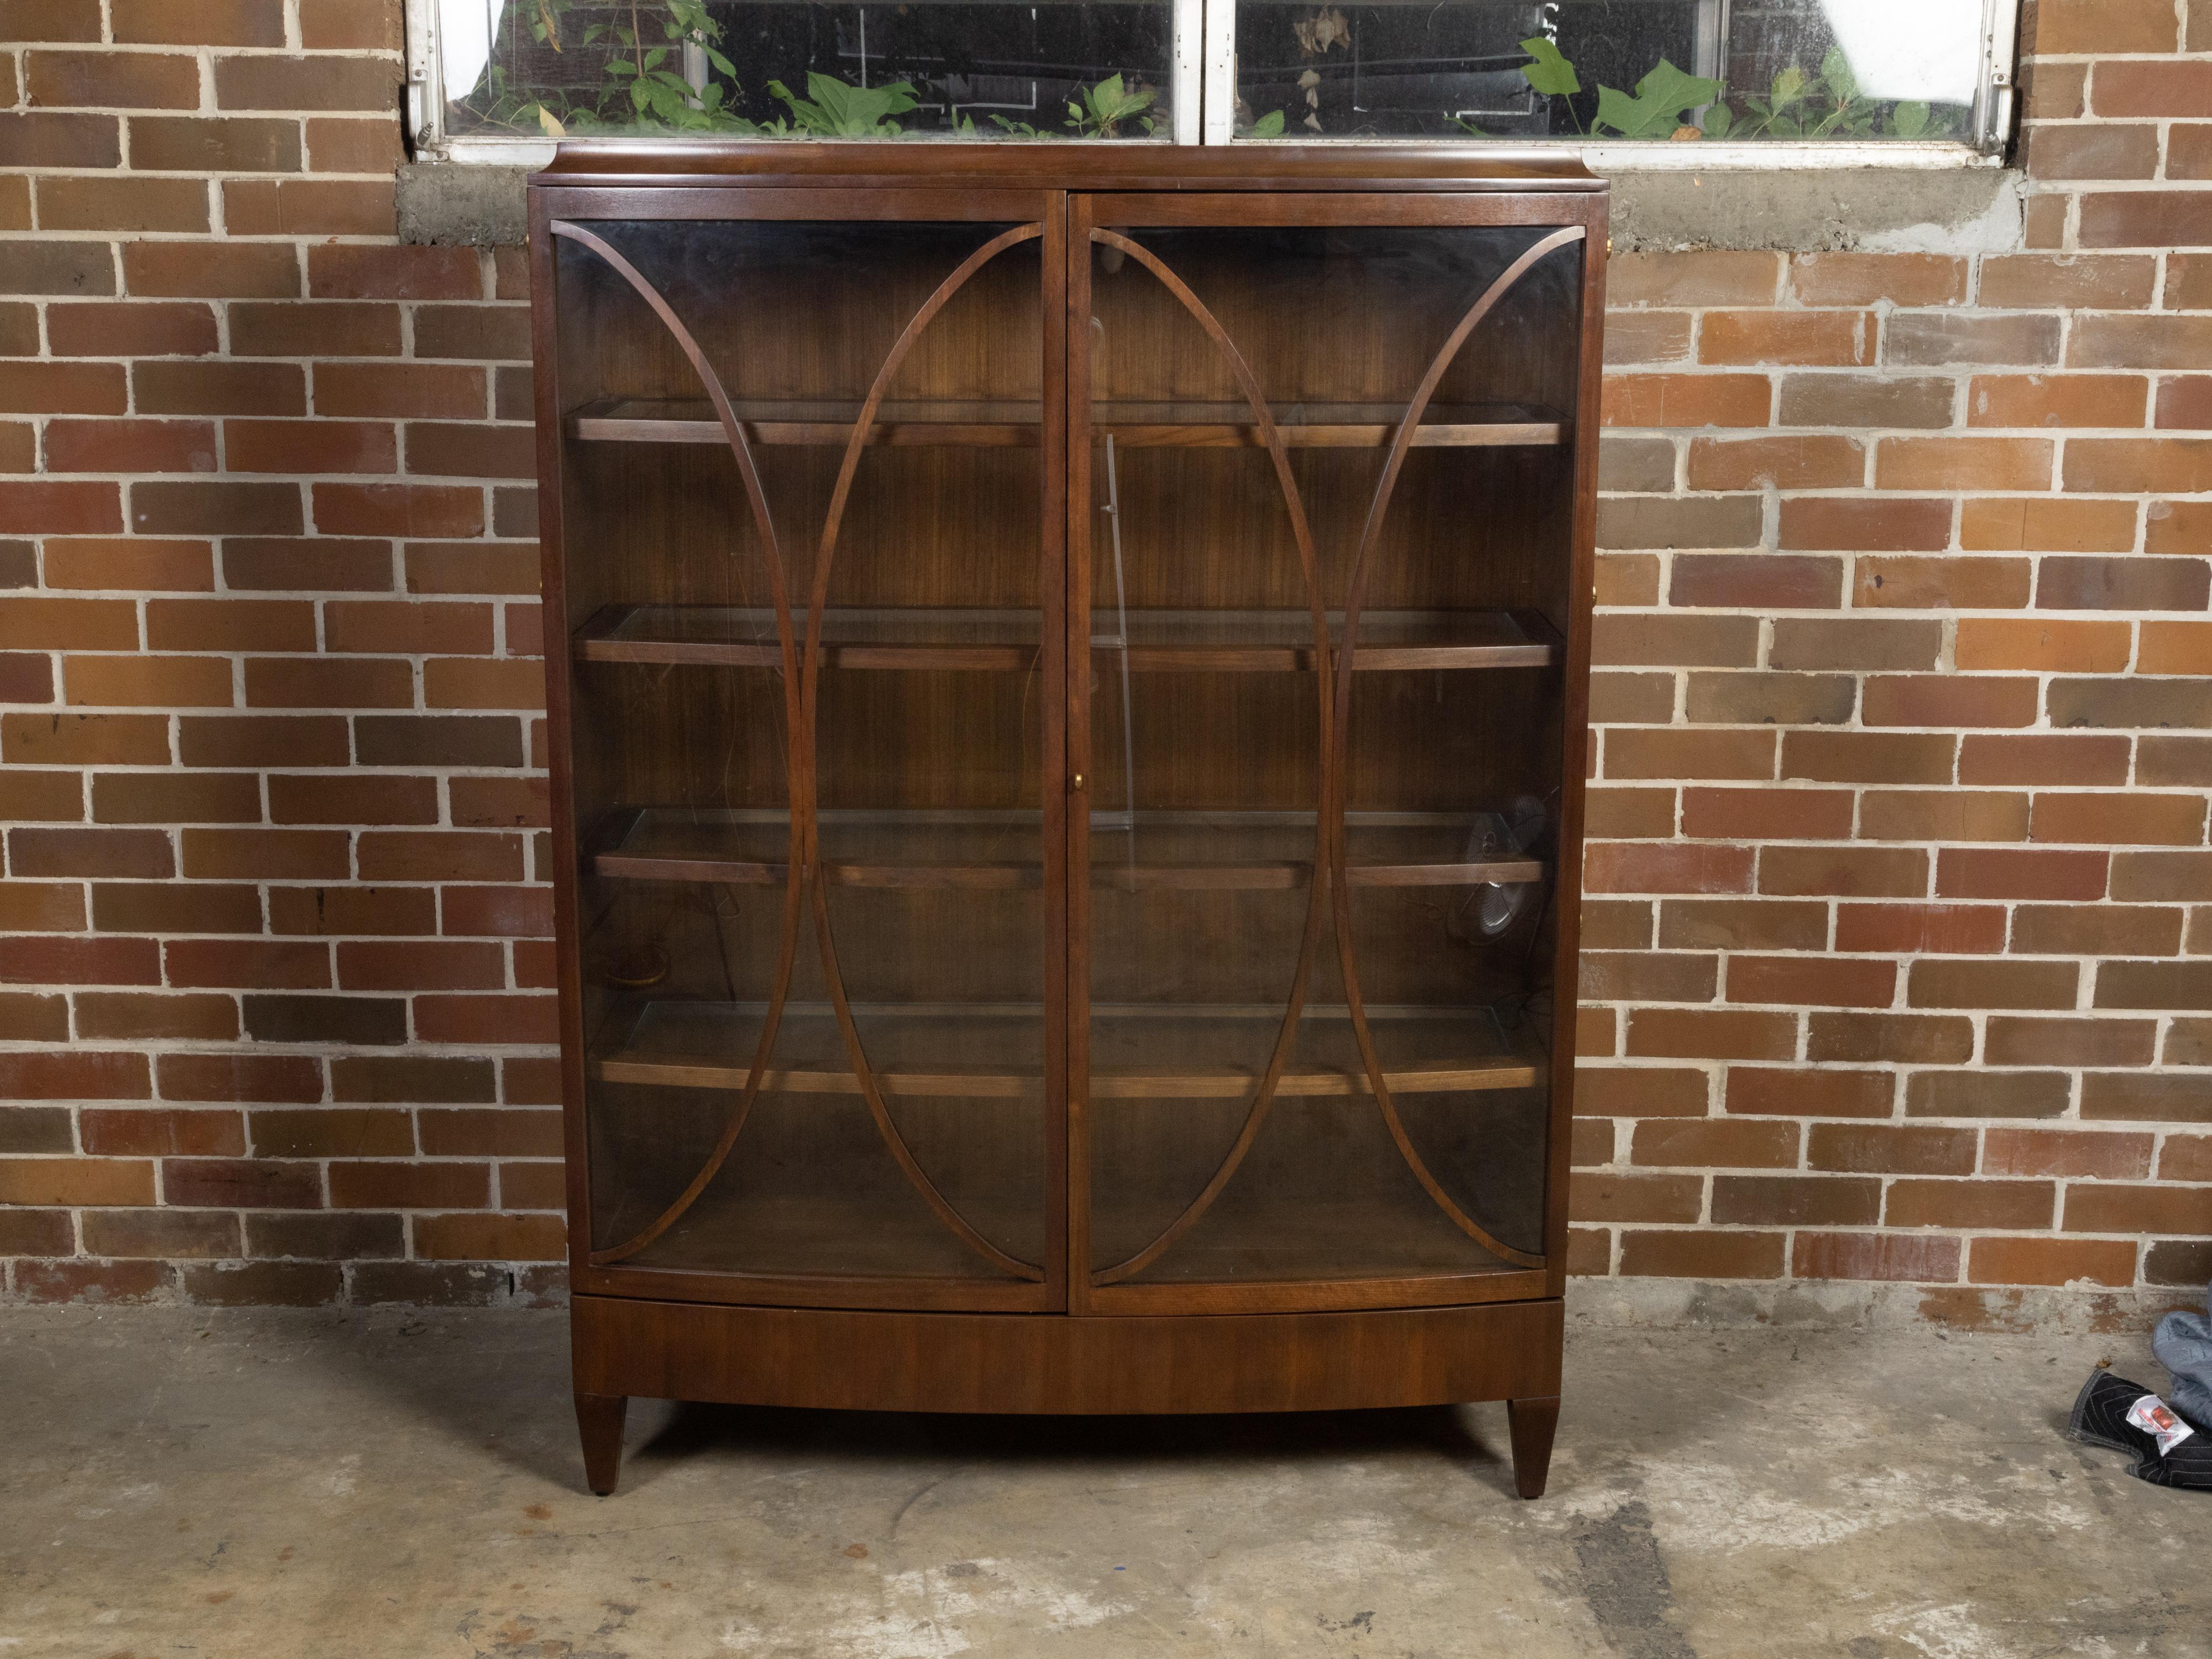 A Barbara Barry for Henredon wooden bow front vitrine cabinet from the late 20th century with oval motifs, glass doors and glass shelves. Designed by Barbara Barry for Henredon during the later years of the 20th century, this wooden cabinet features